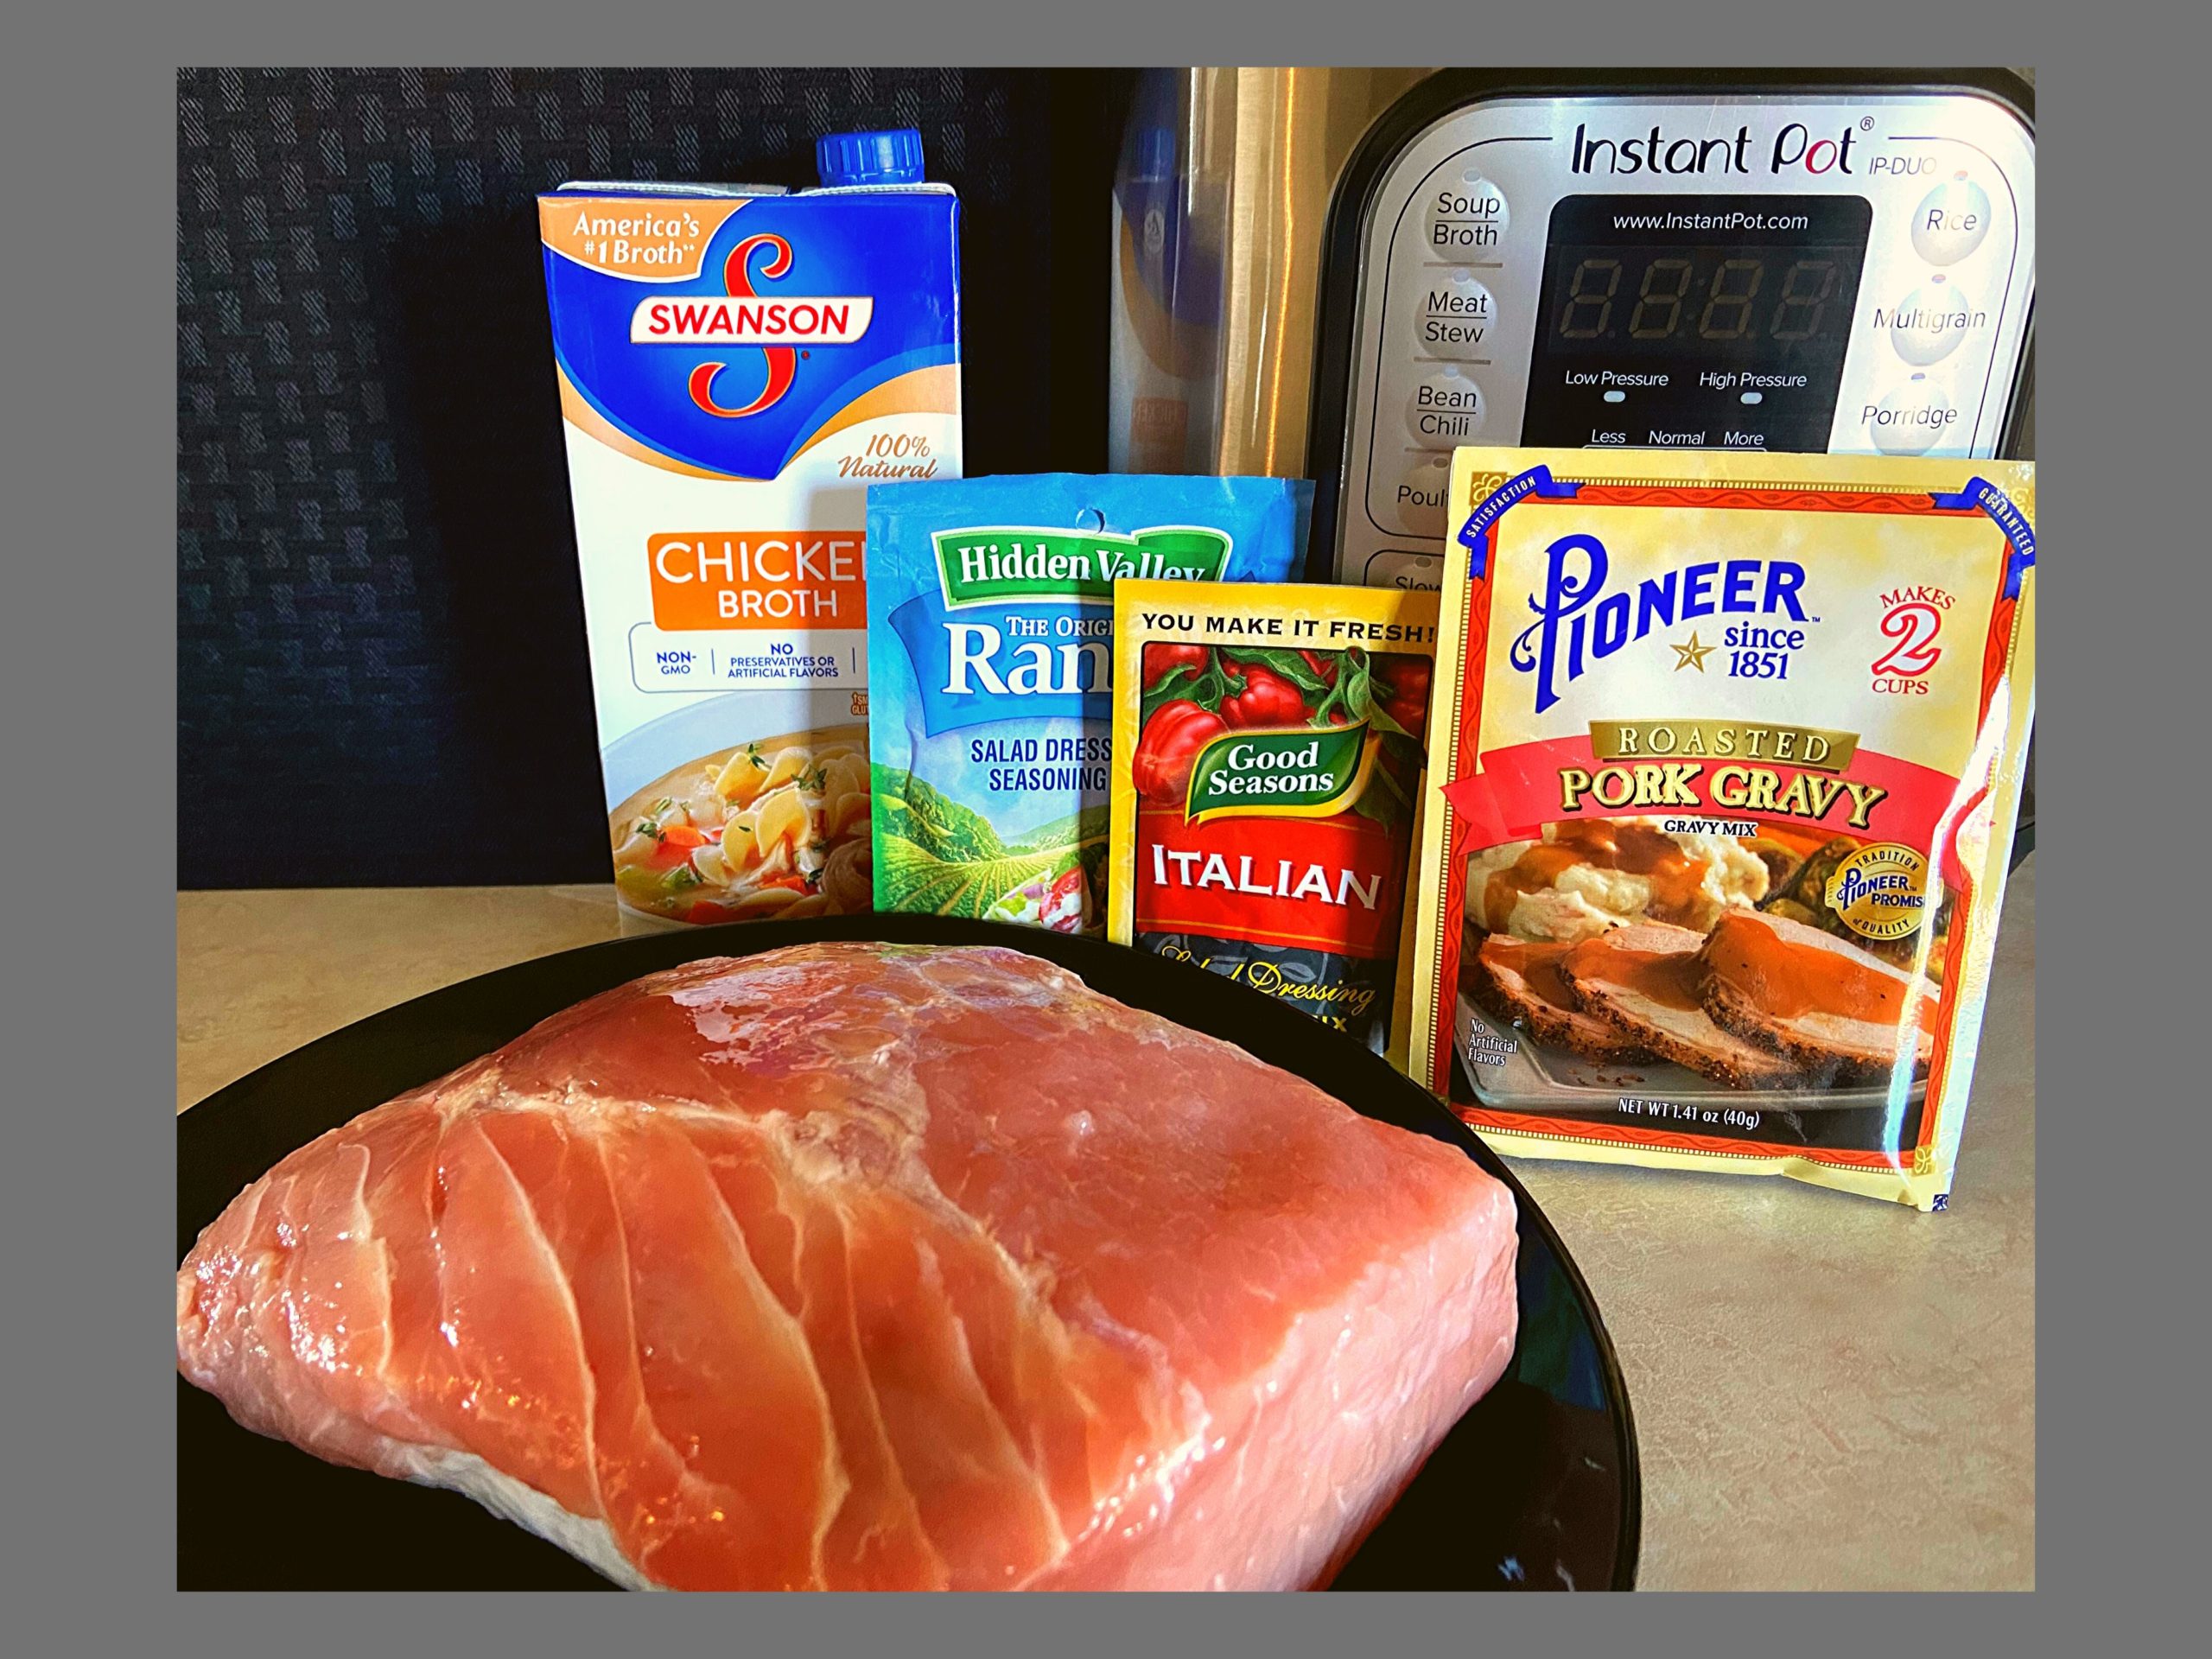 A raw pork roast on a black plate. A container of chicken broth, ranch dressing (dry mix), Italian dressing (dry mix), Pork Gravy (dry mix), and an Instant Pot sitting on a counter top.